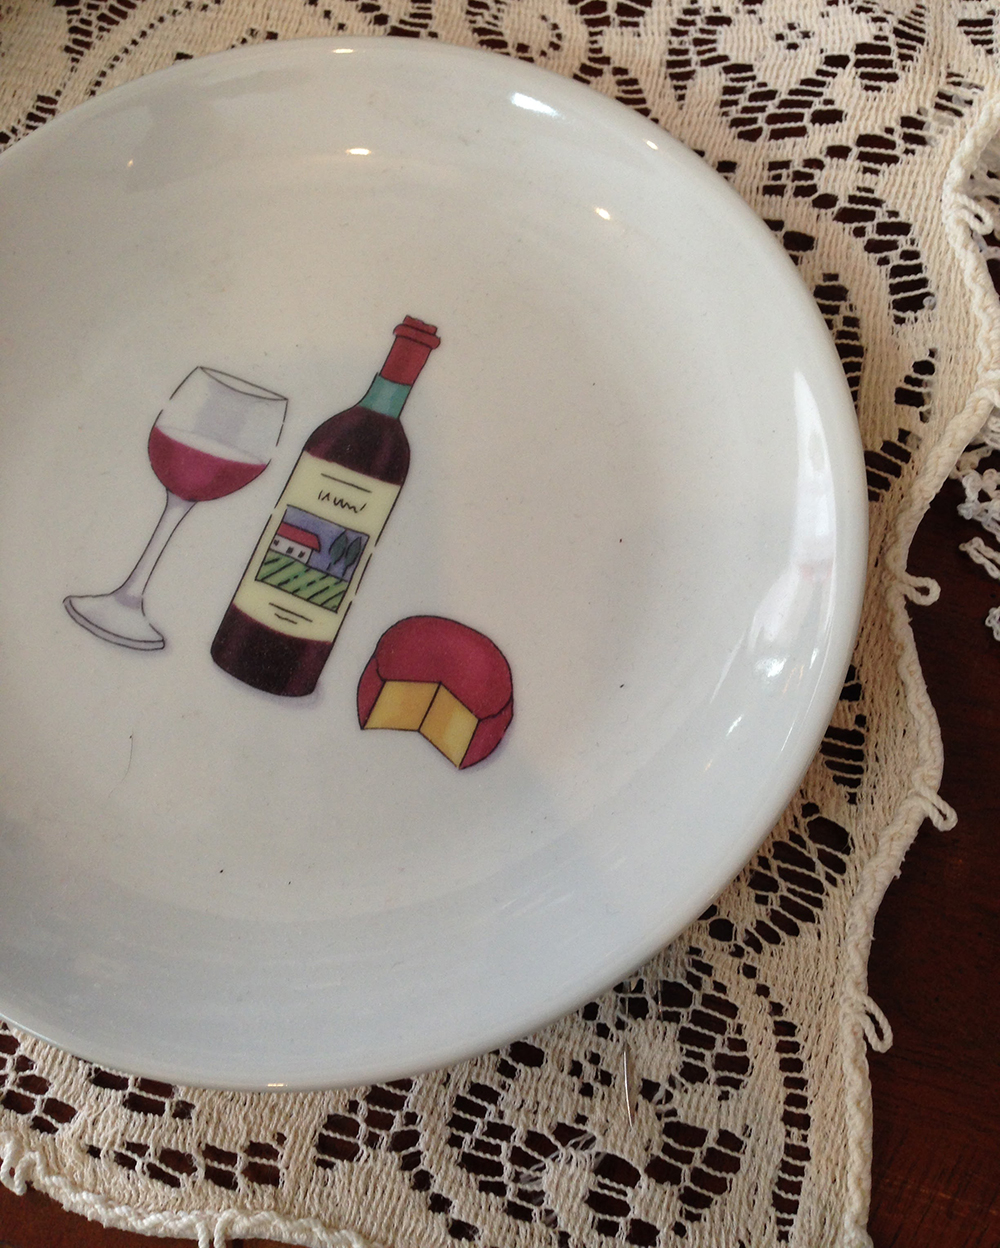 Wine and Cheese decorative plate - Art Inspiration and Thrifting